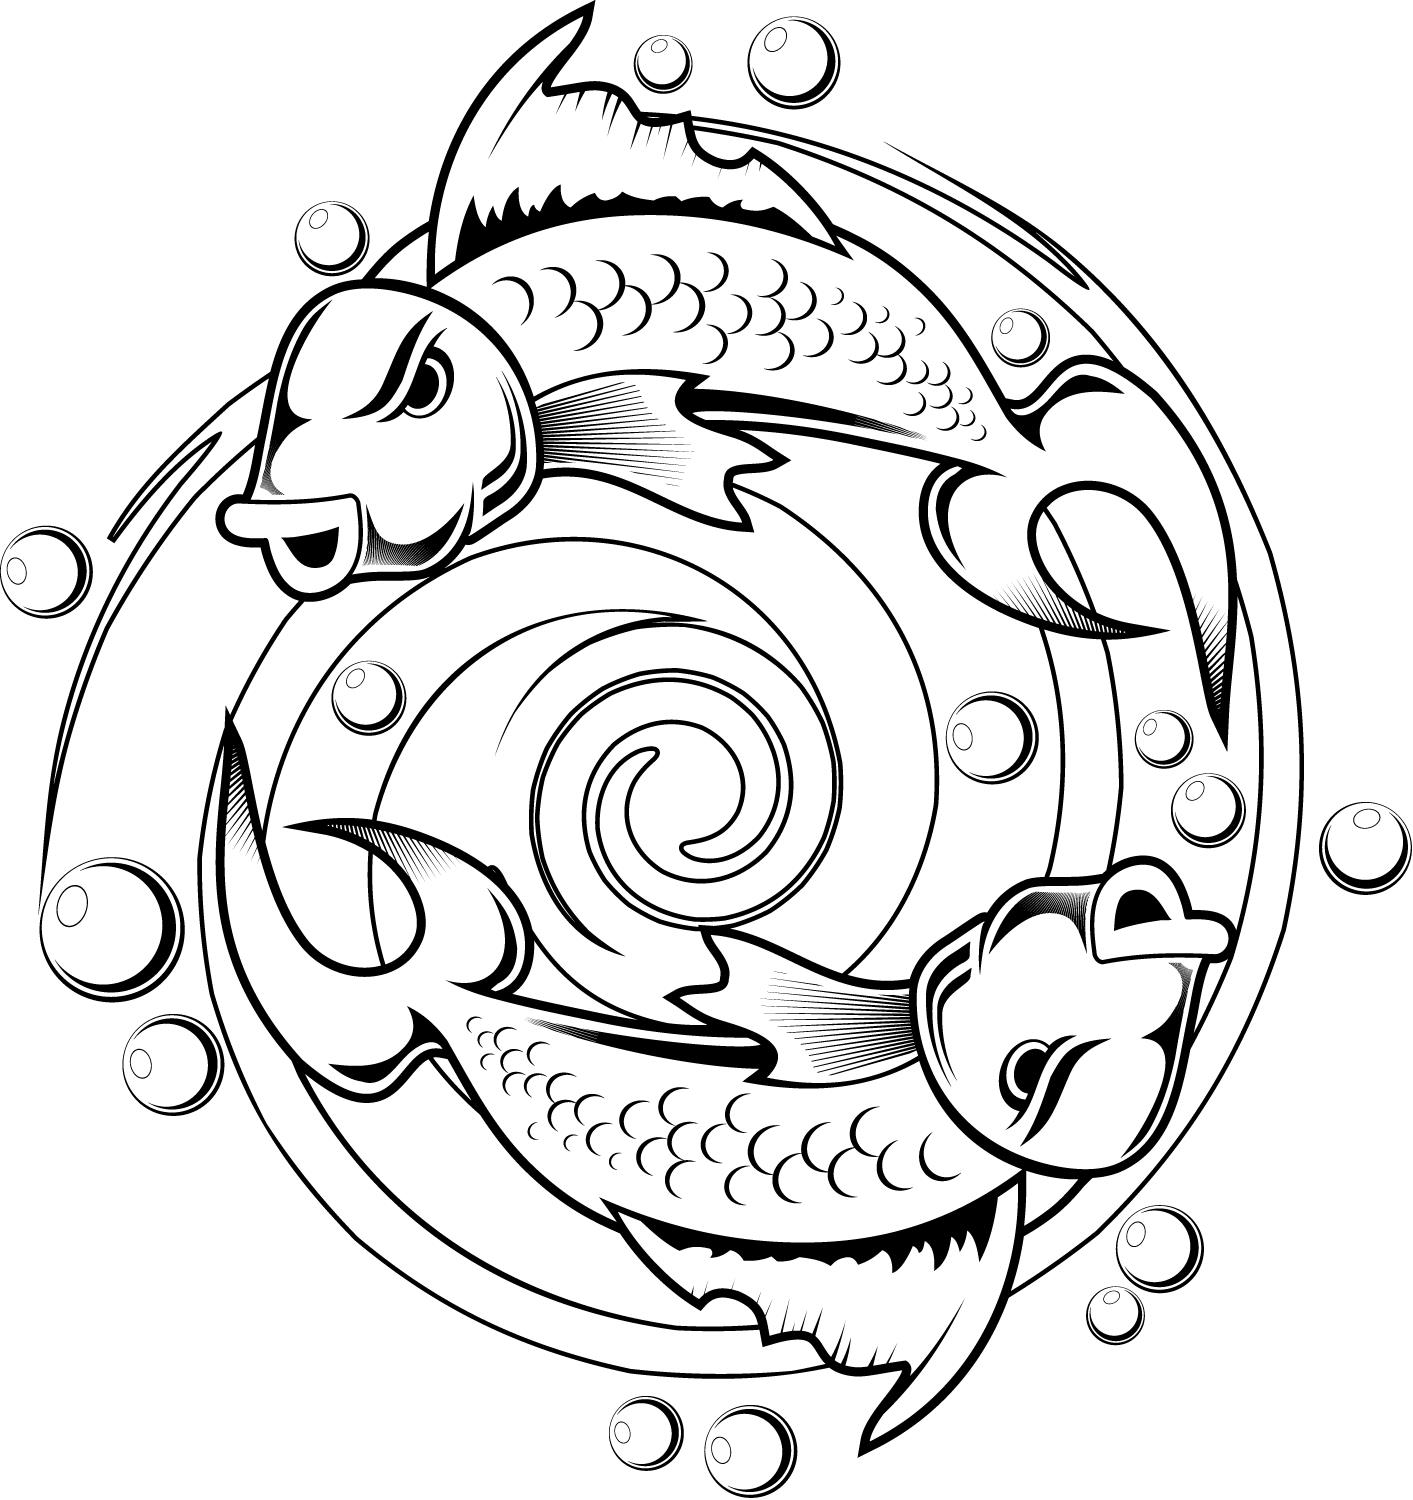 Kids Coloring Pages Of A Koi Fish Tattoo Design | Tattoobite.com